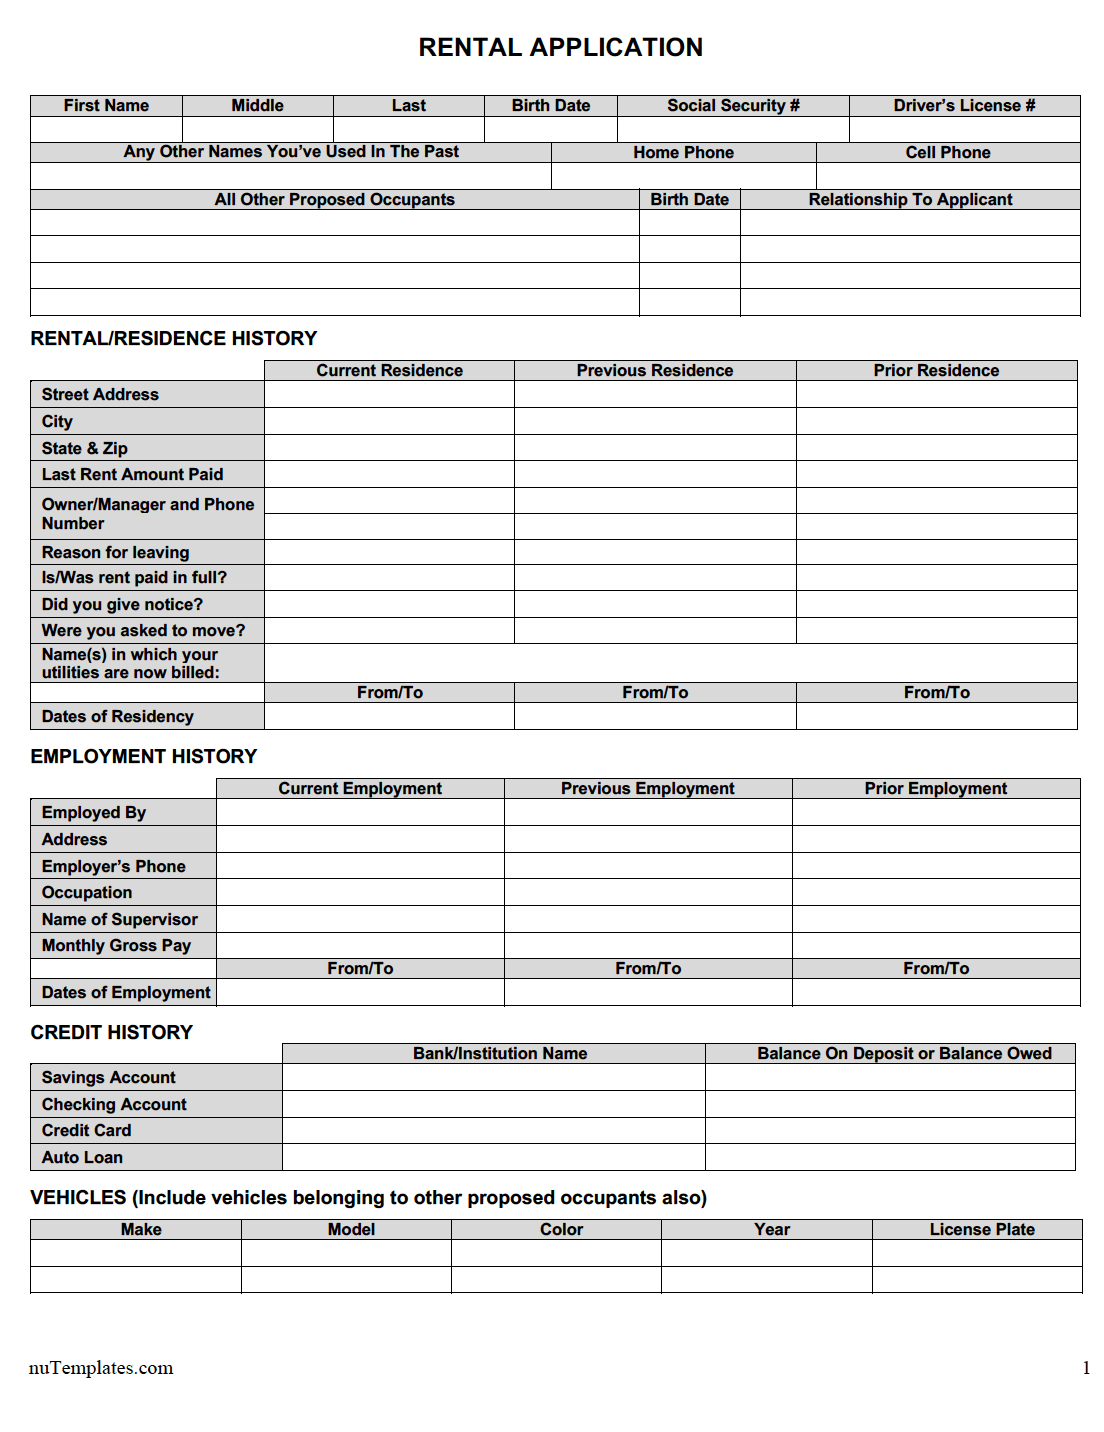 rental application form template img